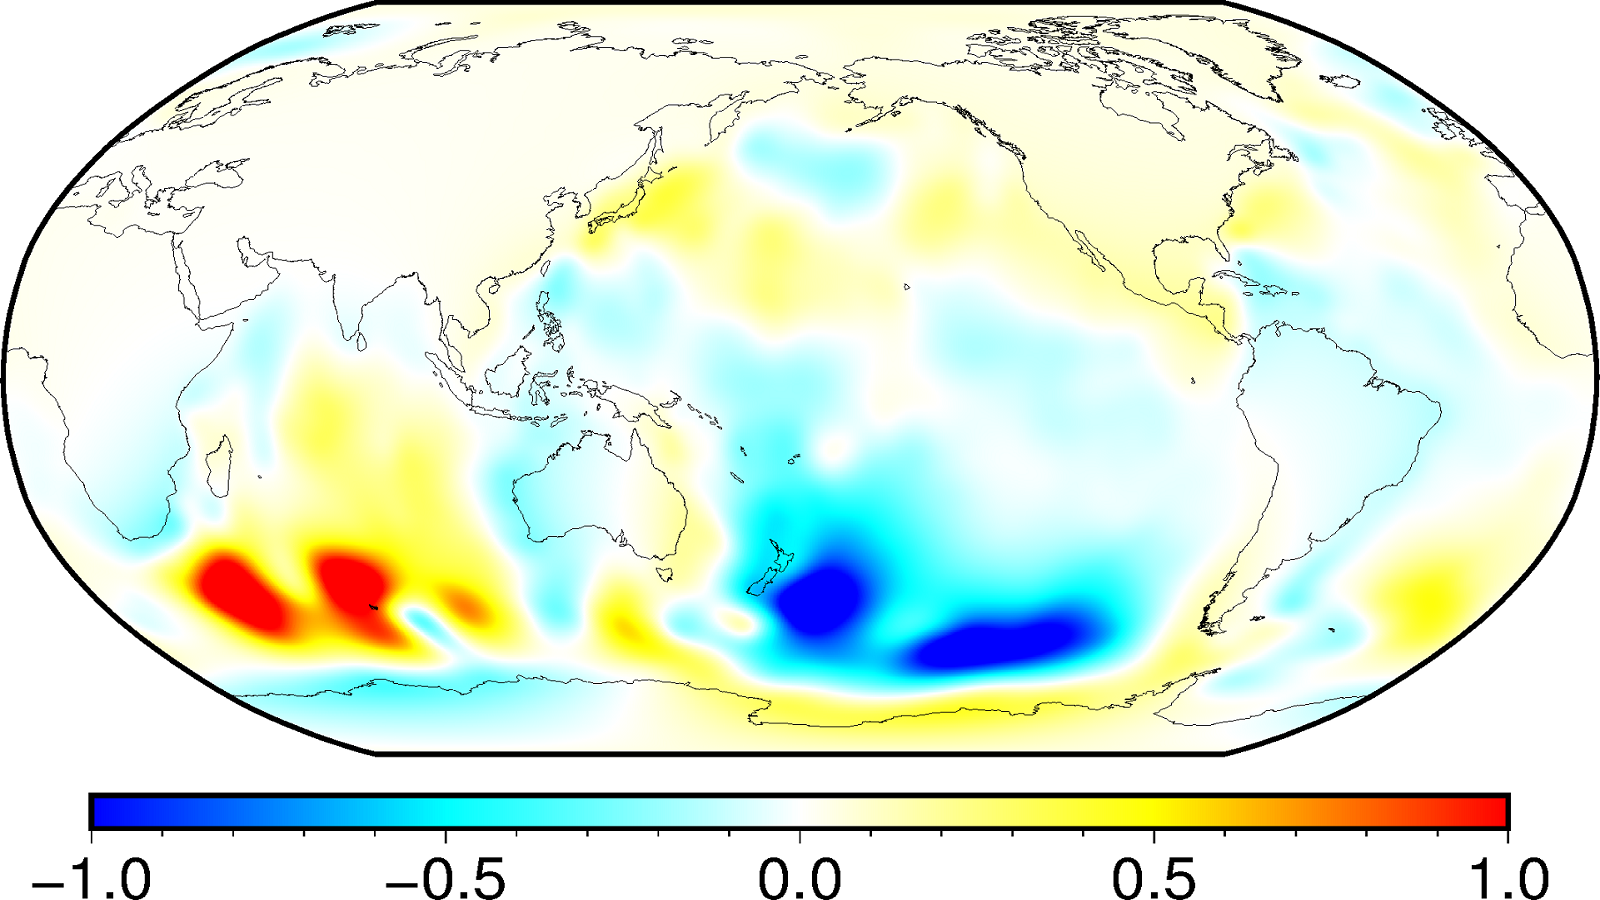 Towards the understanding of the subsurface planetary oceans using ocean-induced magnetic field